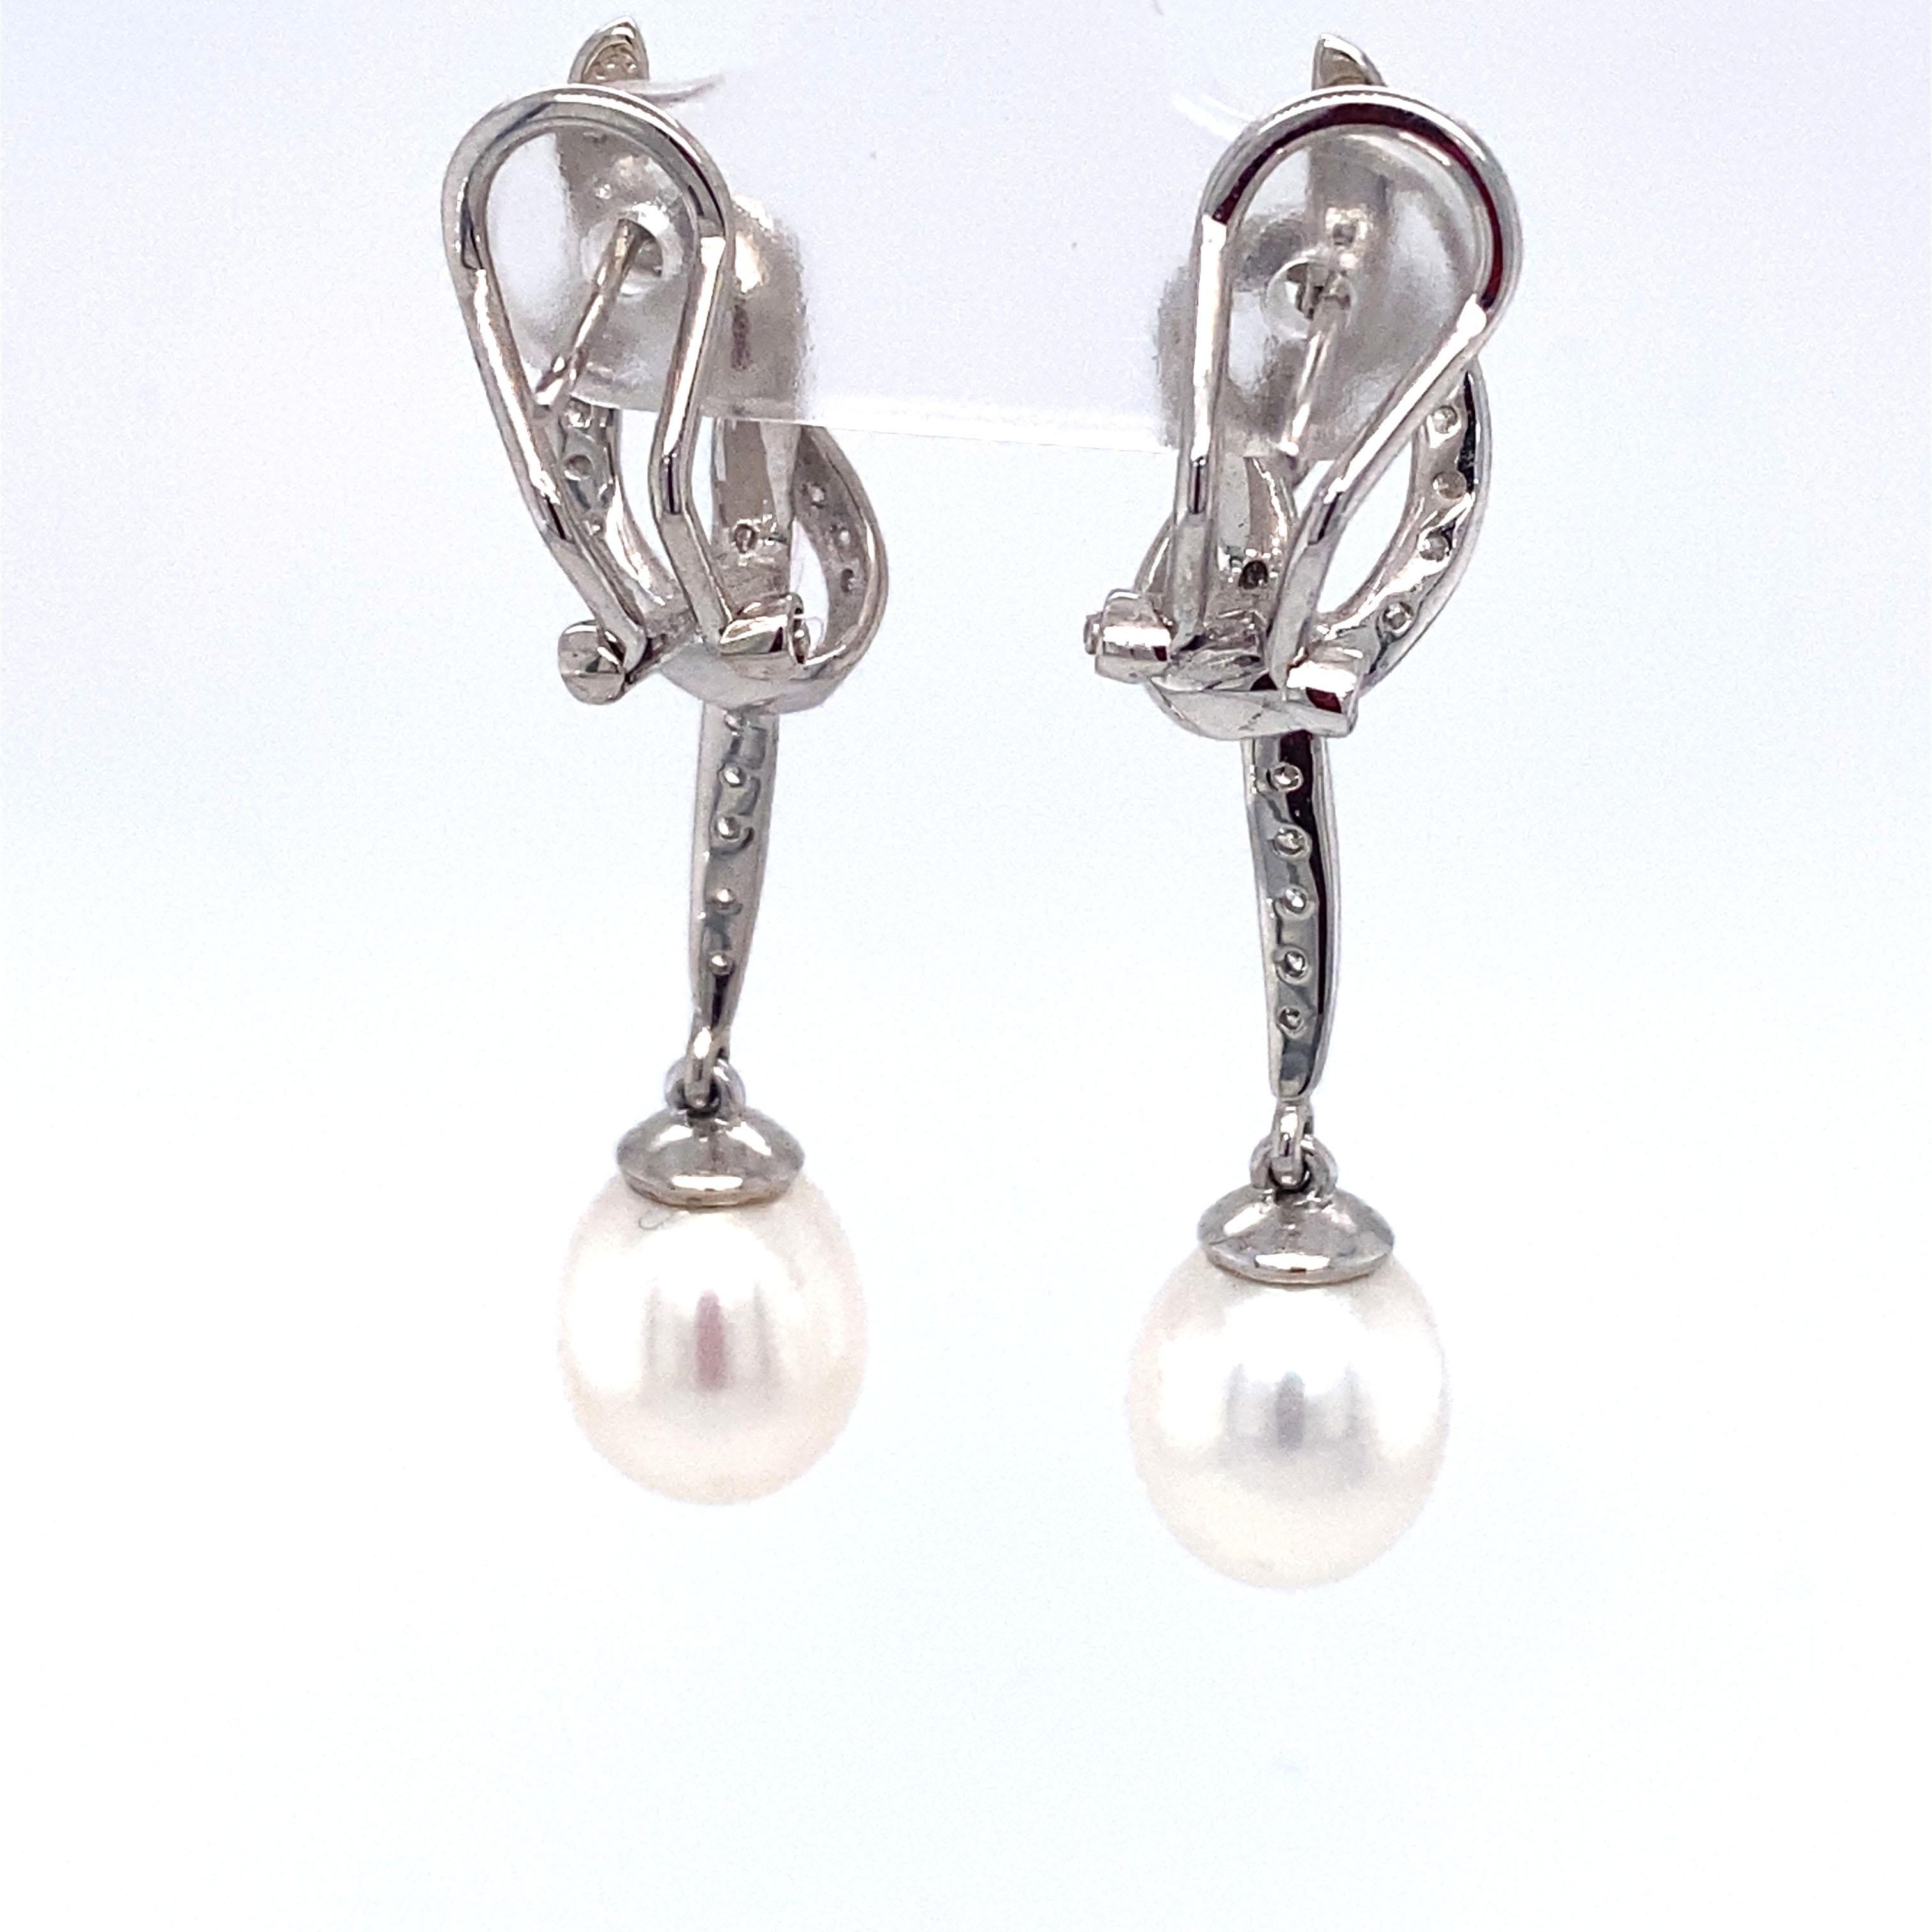 Bead Circa 1980s 0.75 Carat Diamond and Pearl Knot Dangle Earrings in 18K White Gold